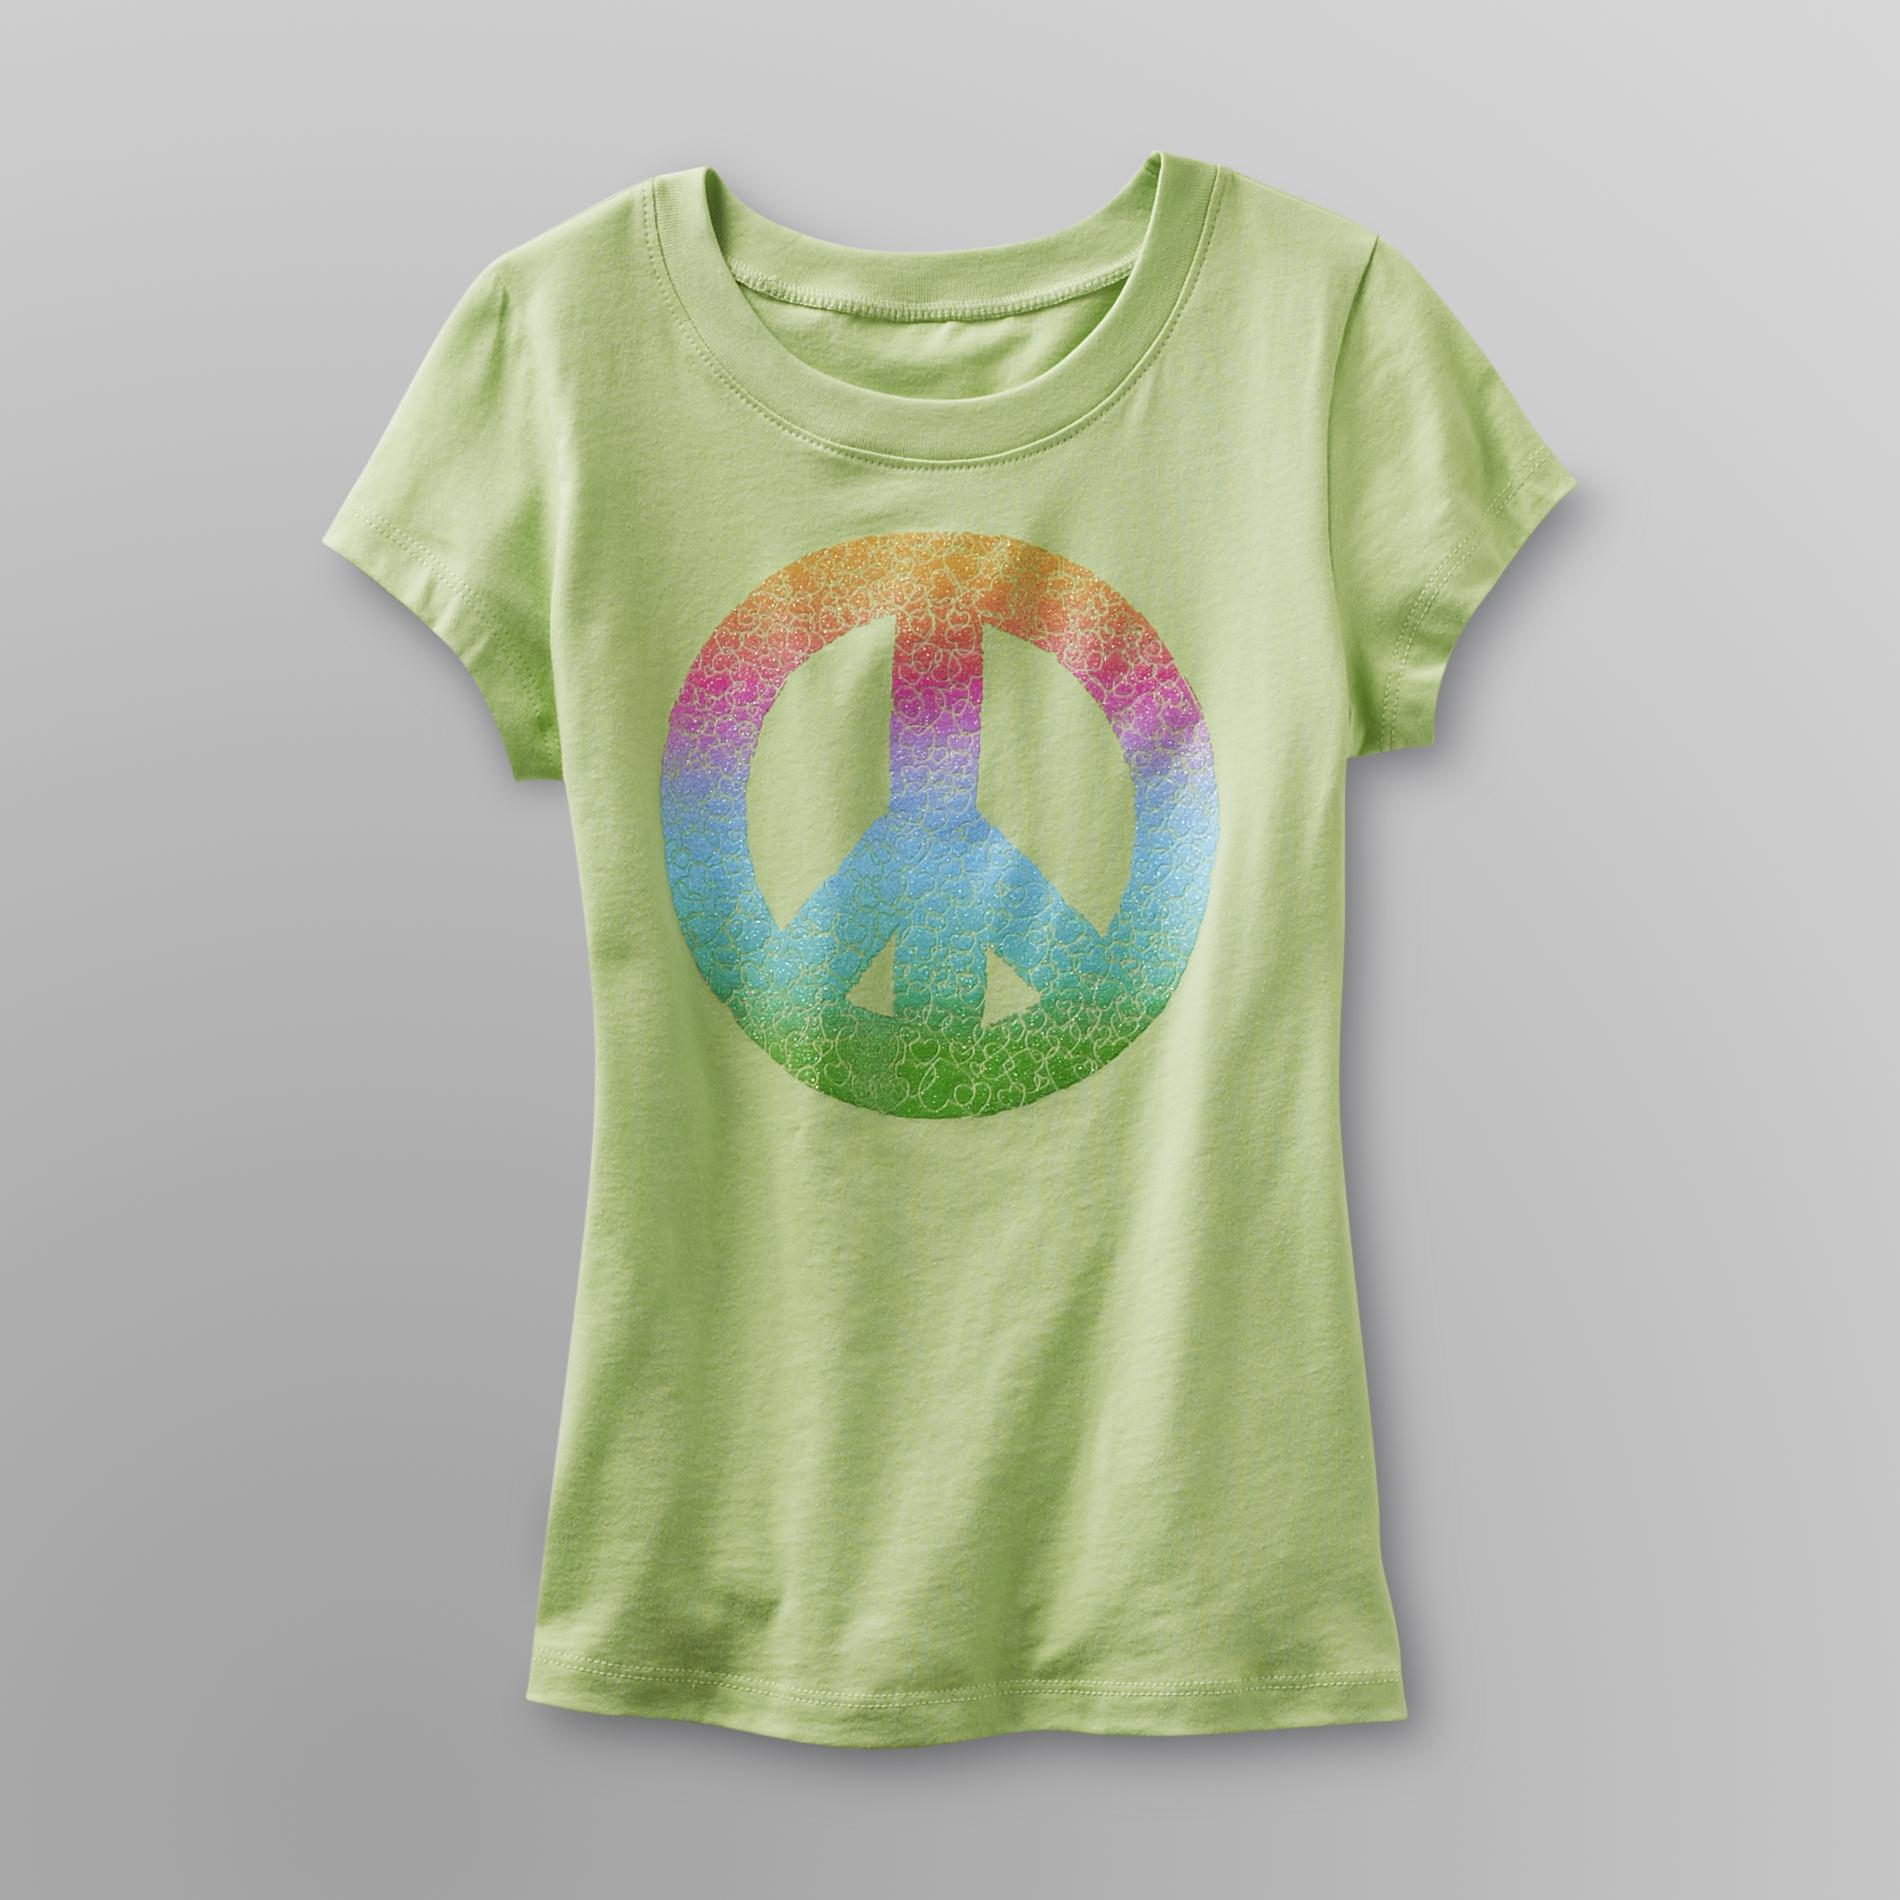 Route 66 Girl's Graphic T-Shirt - Peace Symbol